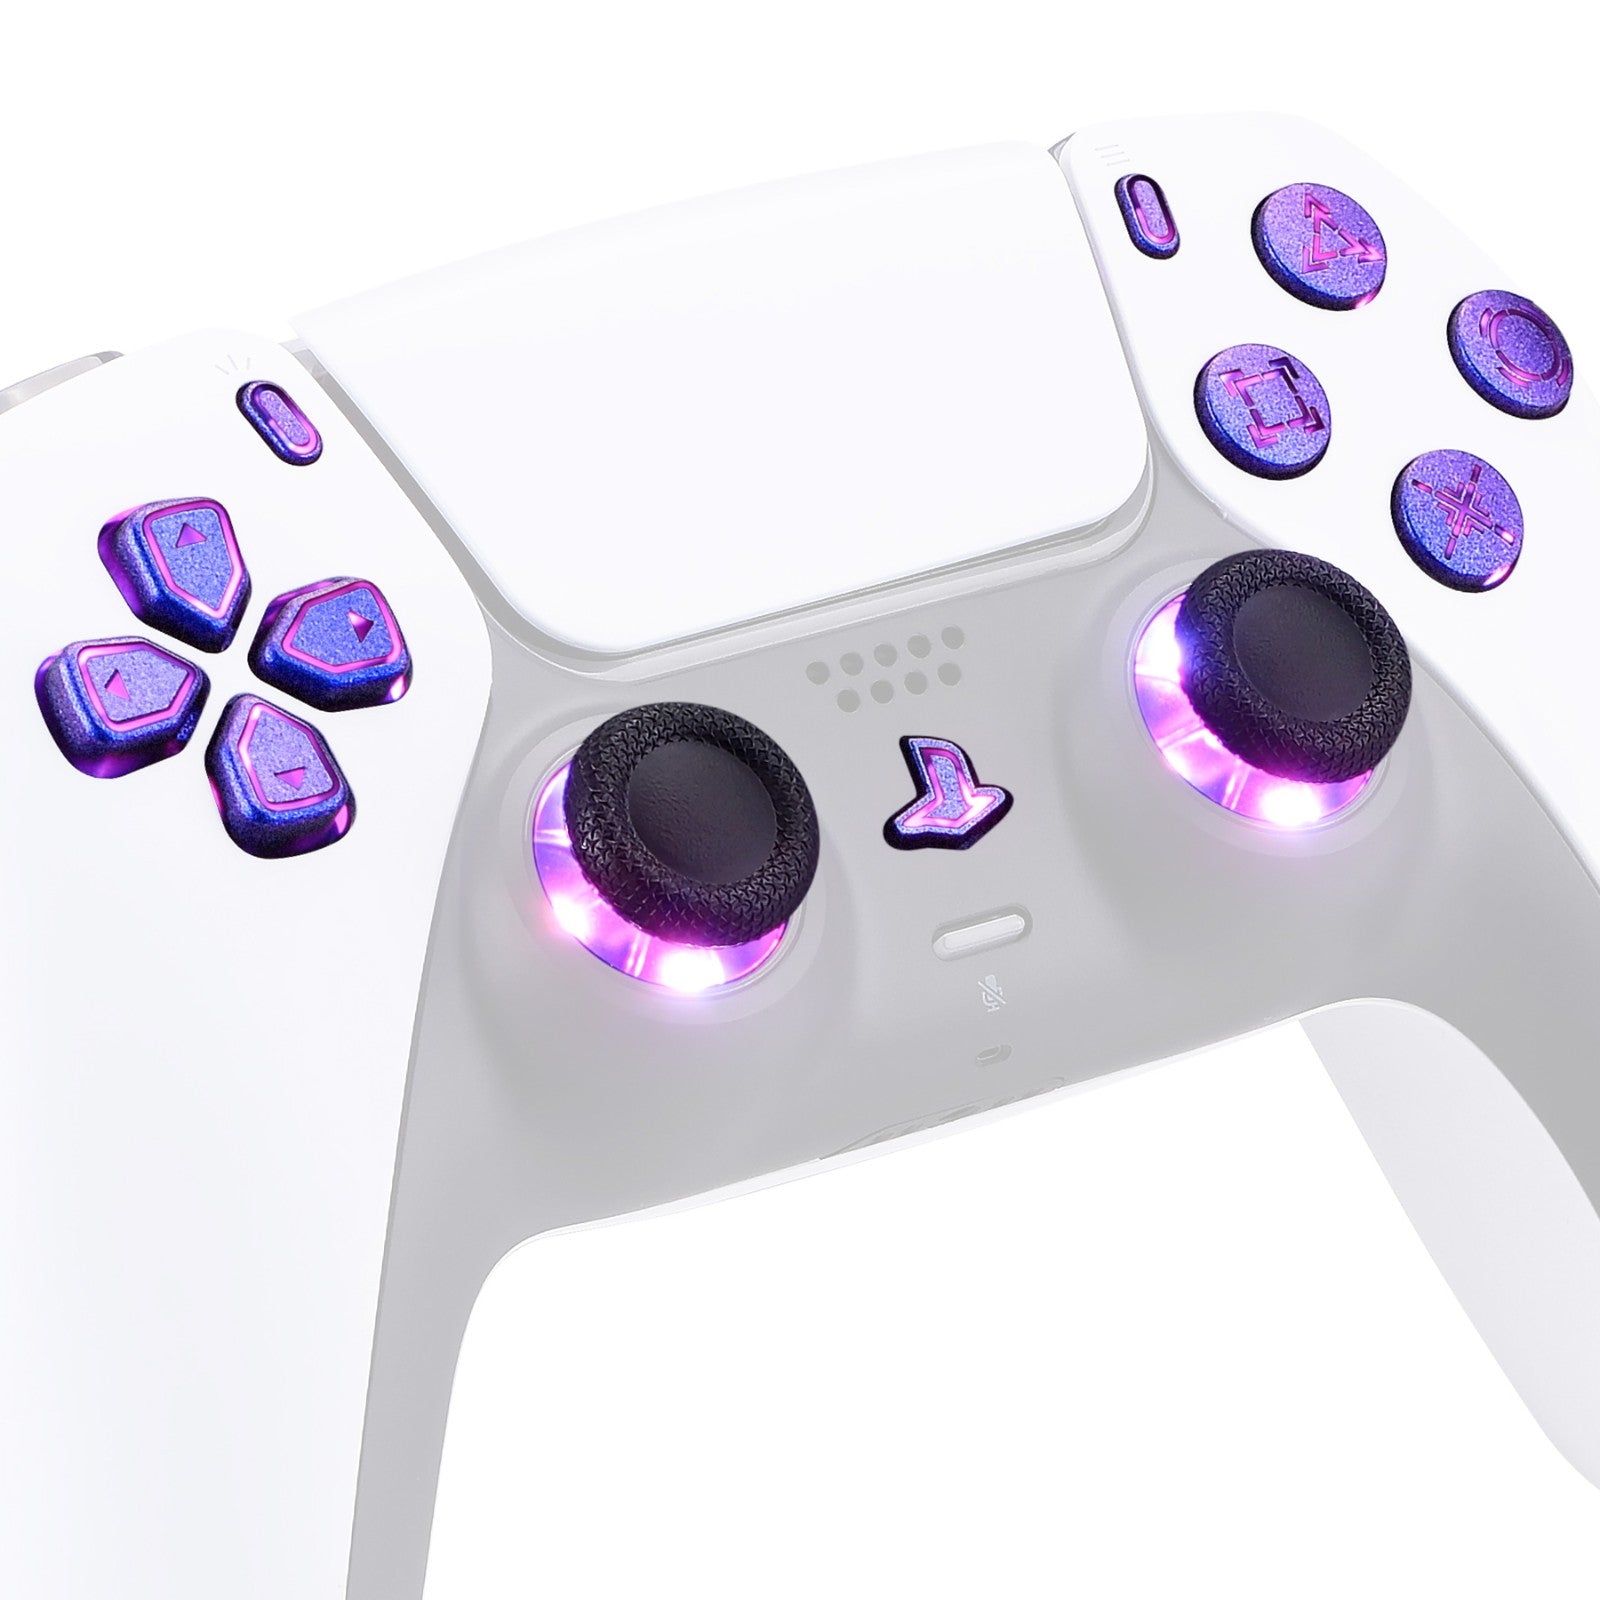 eXtremeRate Multi-Colors Luminated Dpad Thumbstick Share Home Face